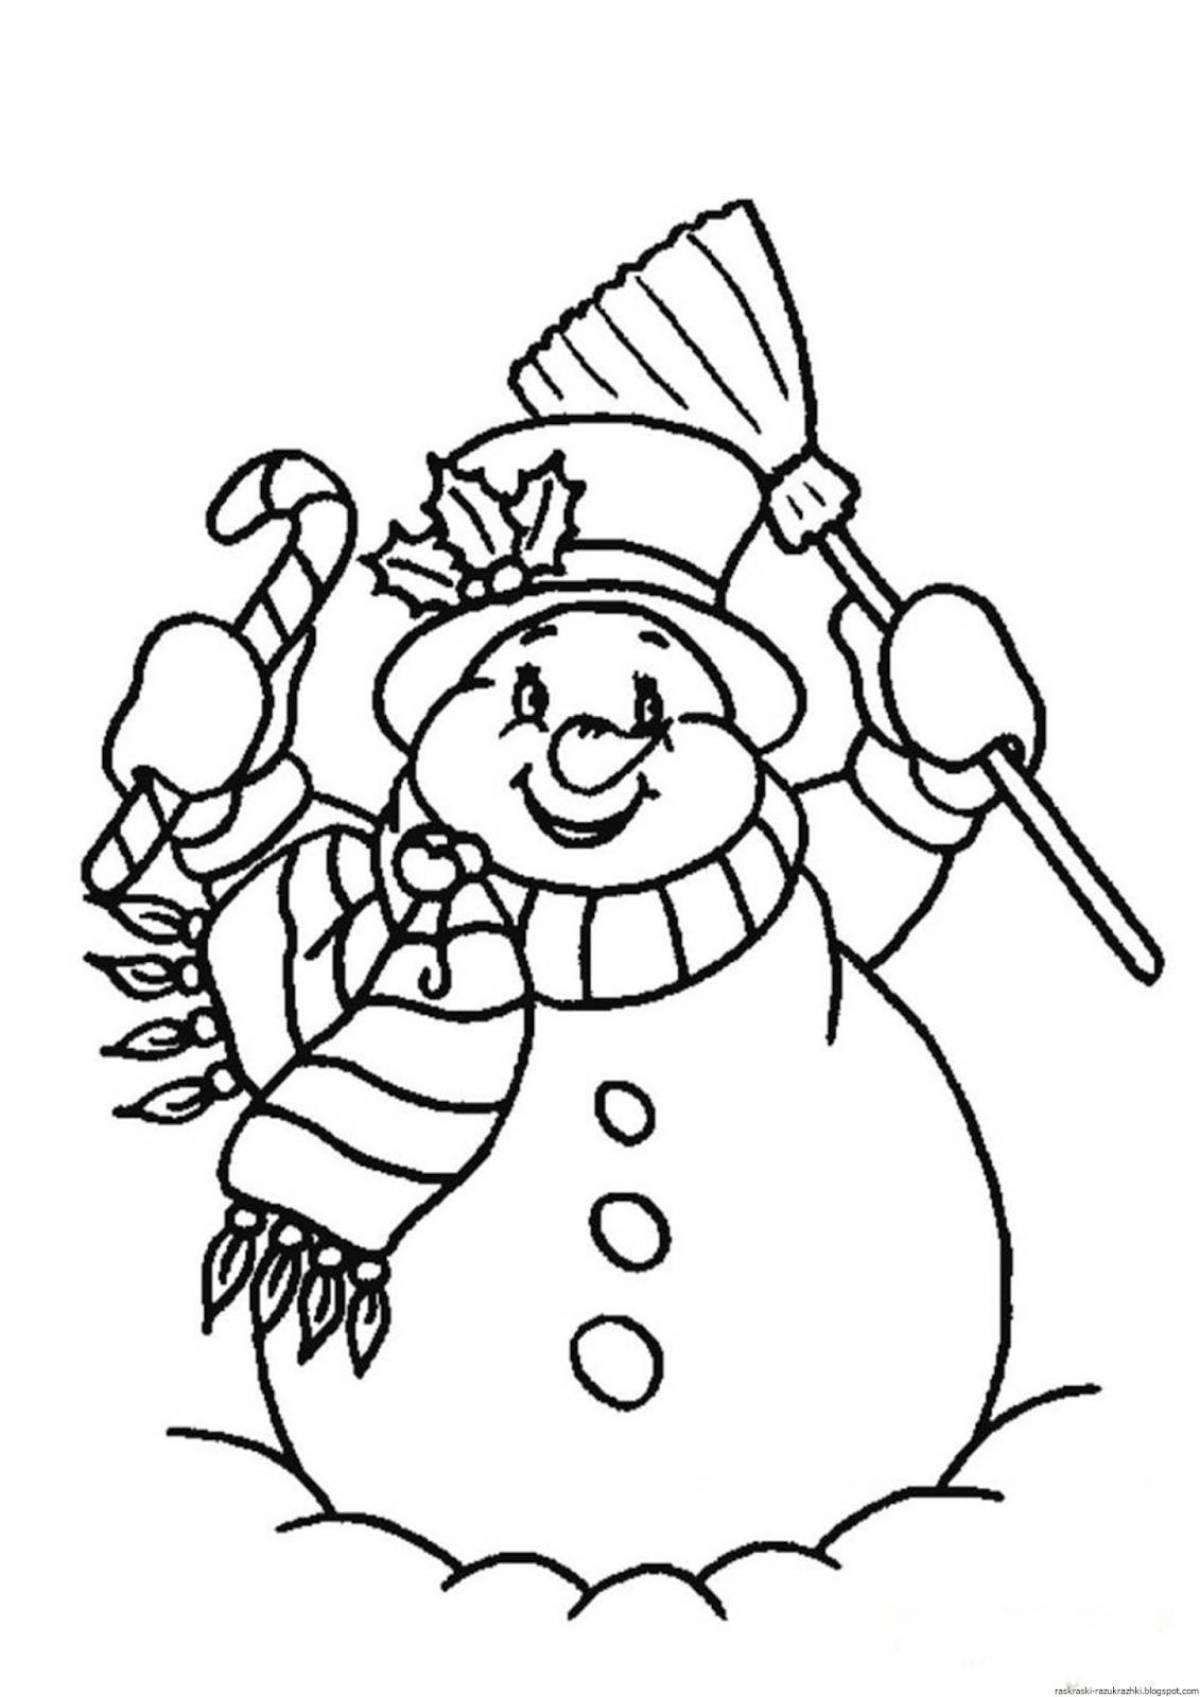 Playful snowman coloring page for kids